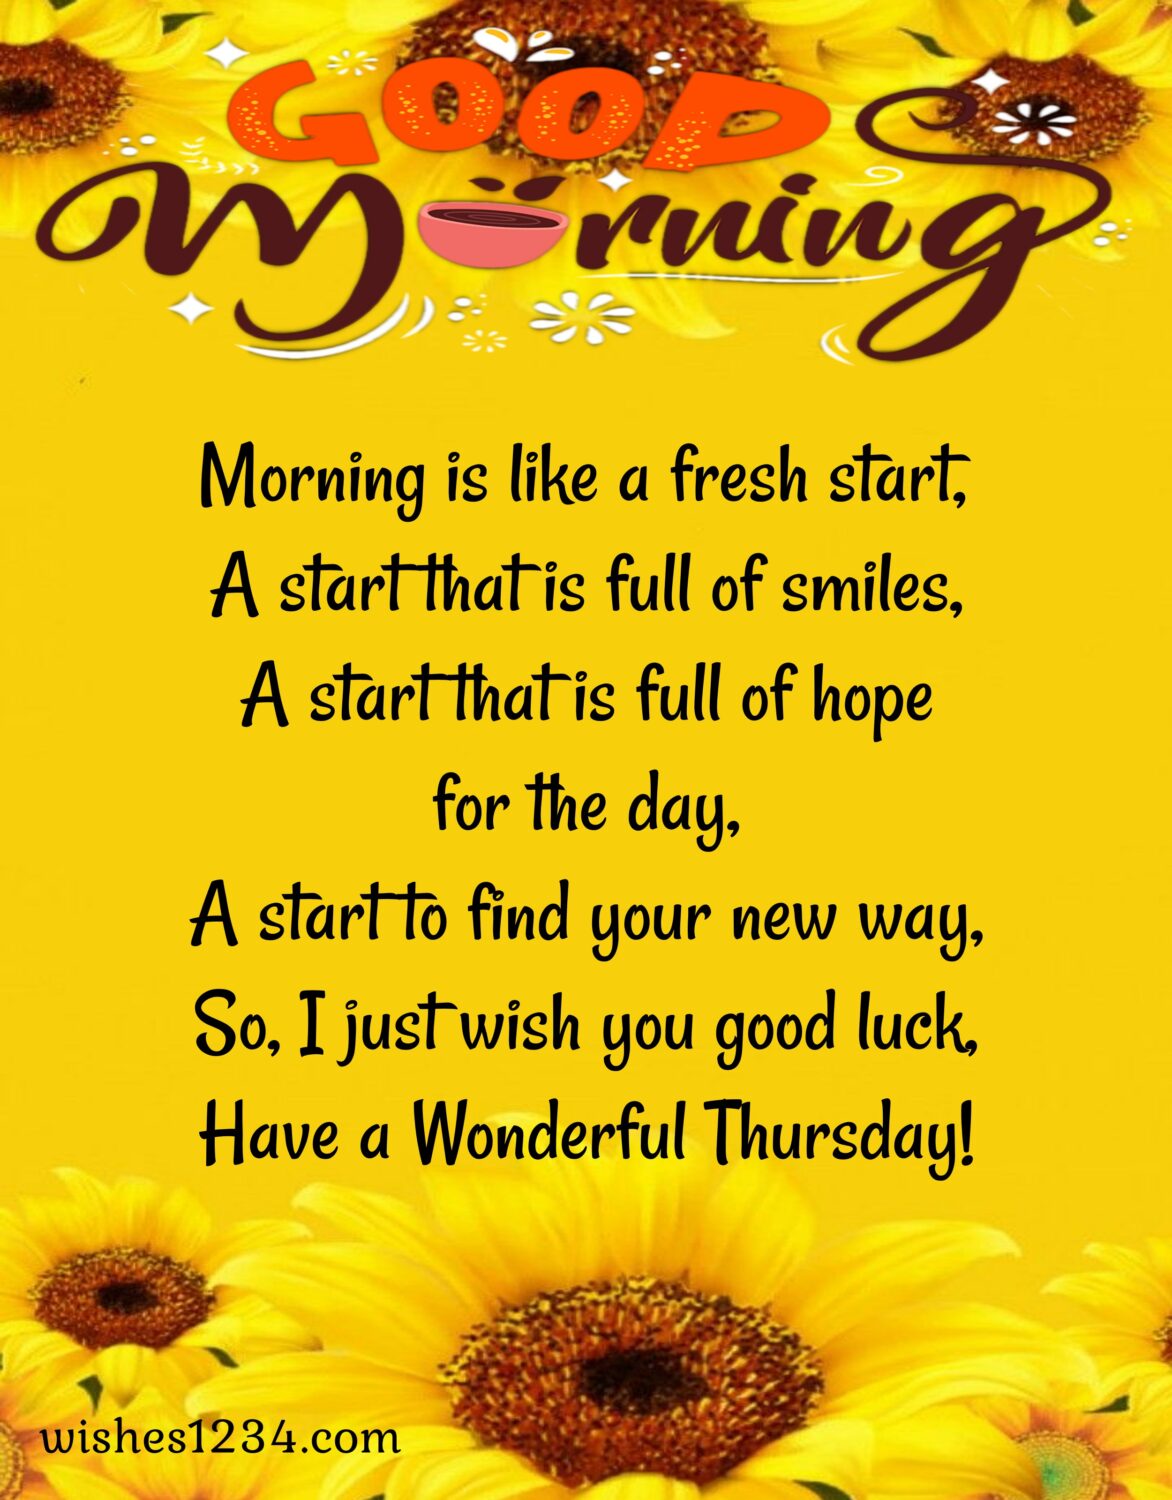 Good morning Thursday with sunflowers bakground, Motivational Thursday quotes.